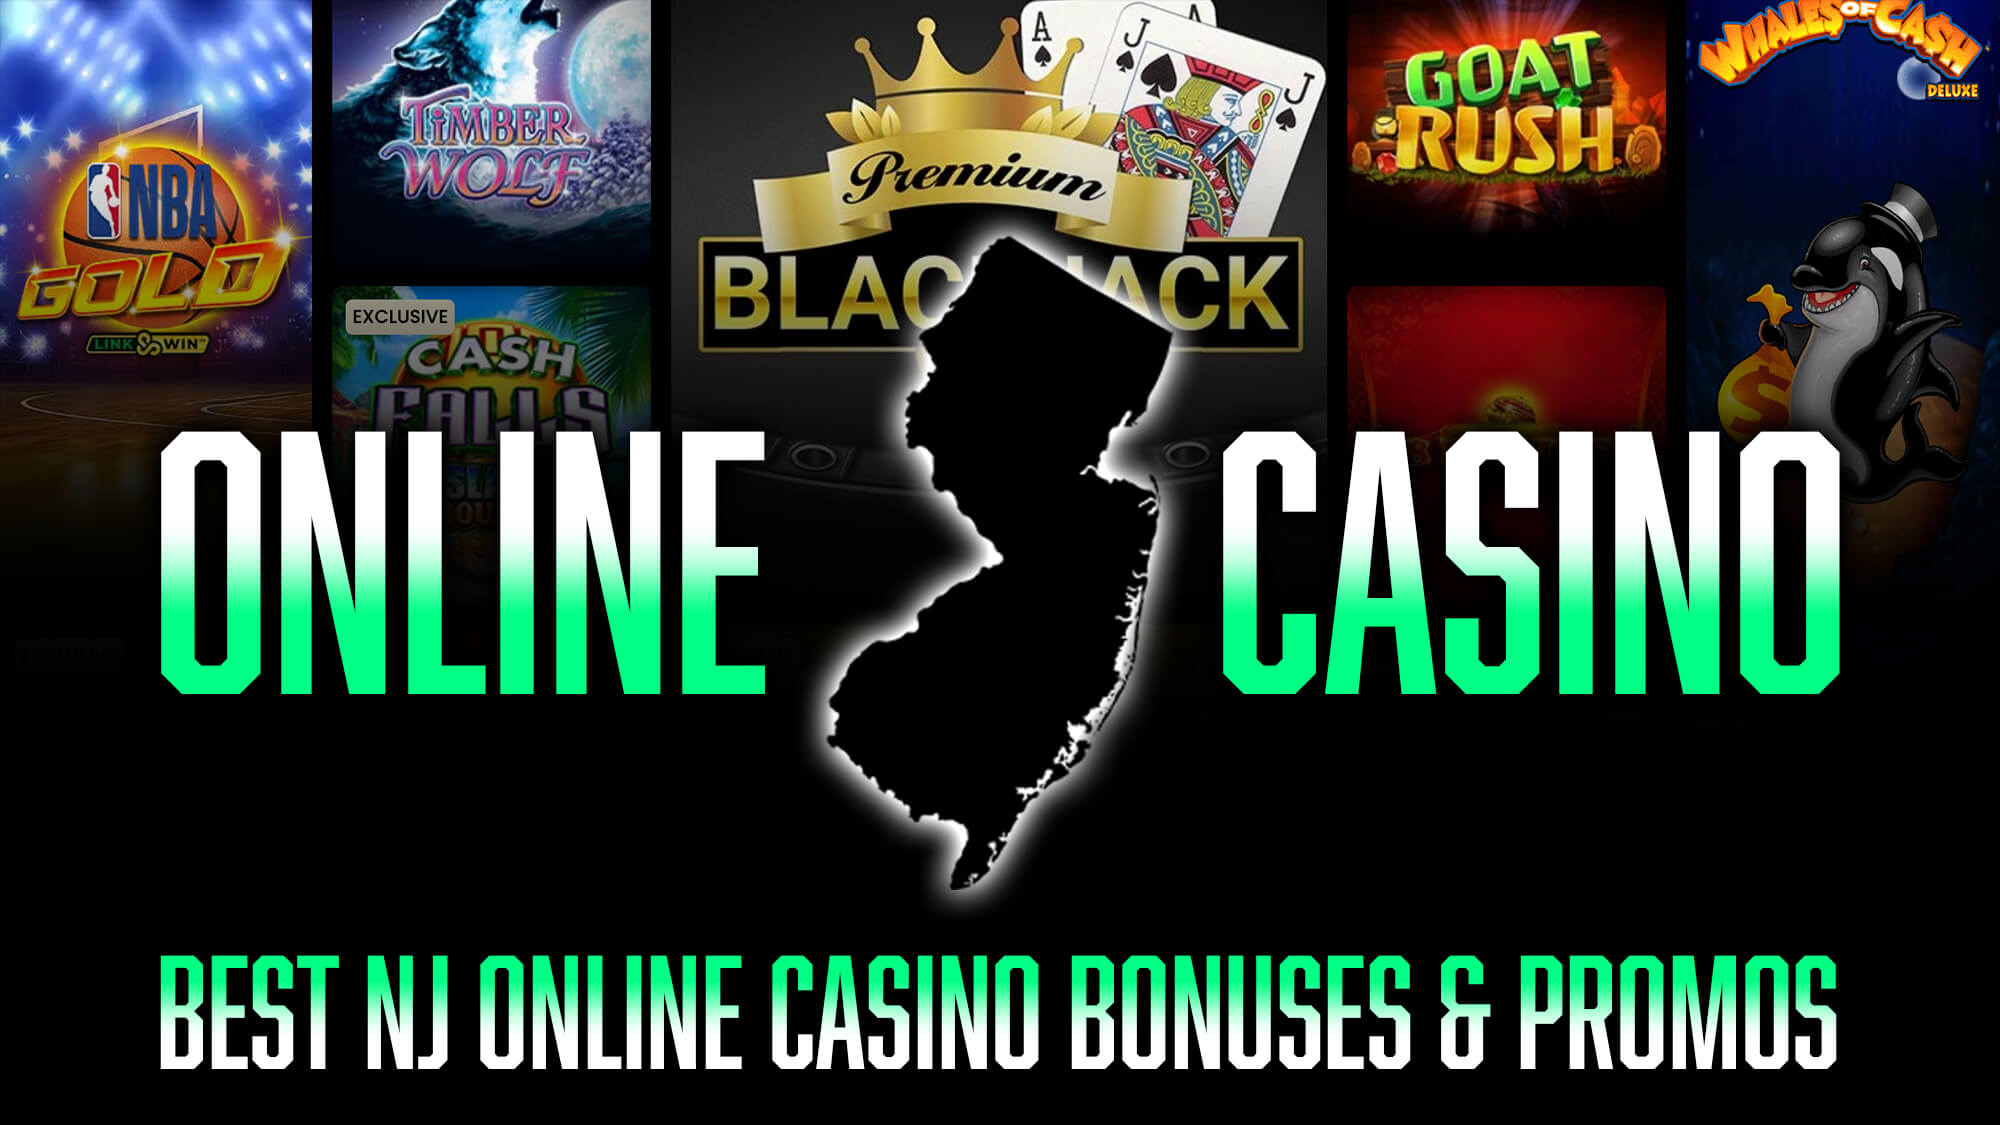 You Can Thank Us Later - 3 Reasons To Stop Thinking About the best online casinos in